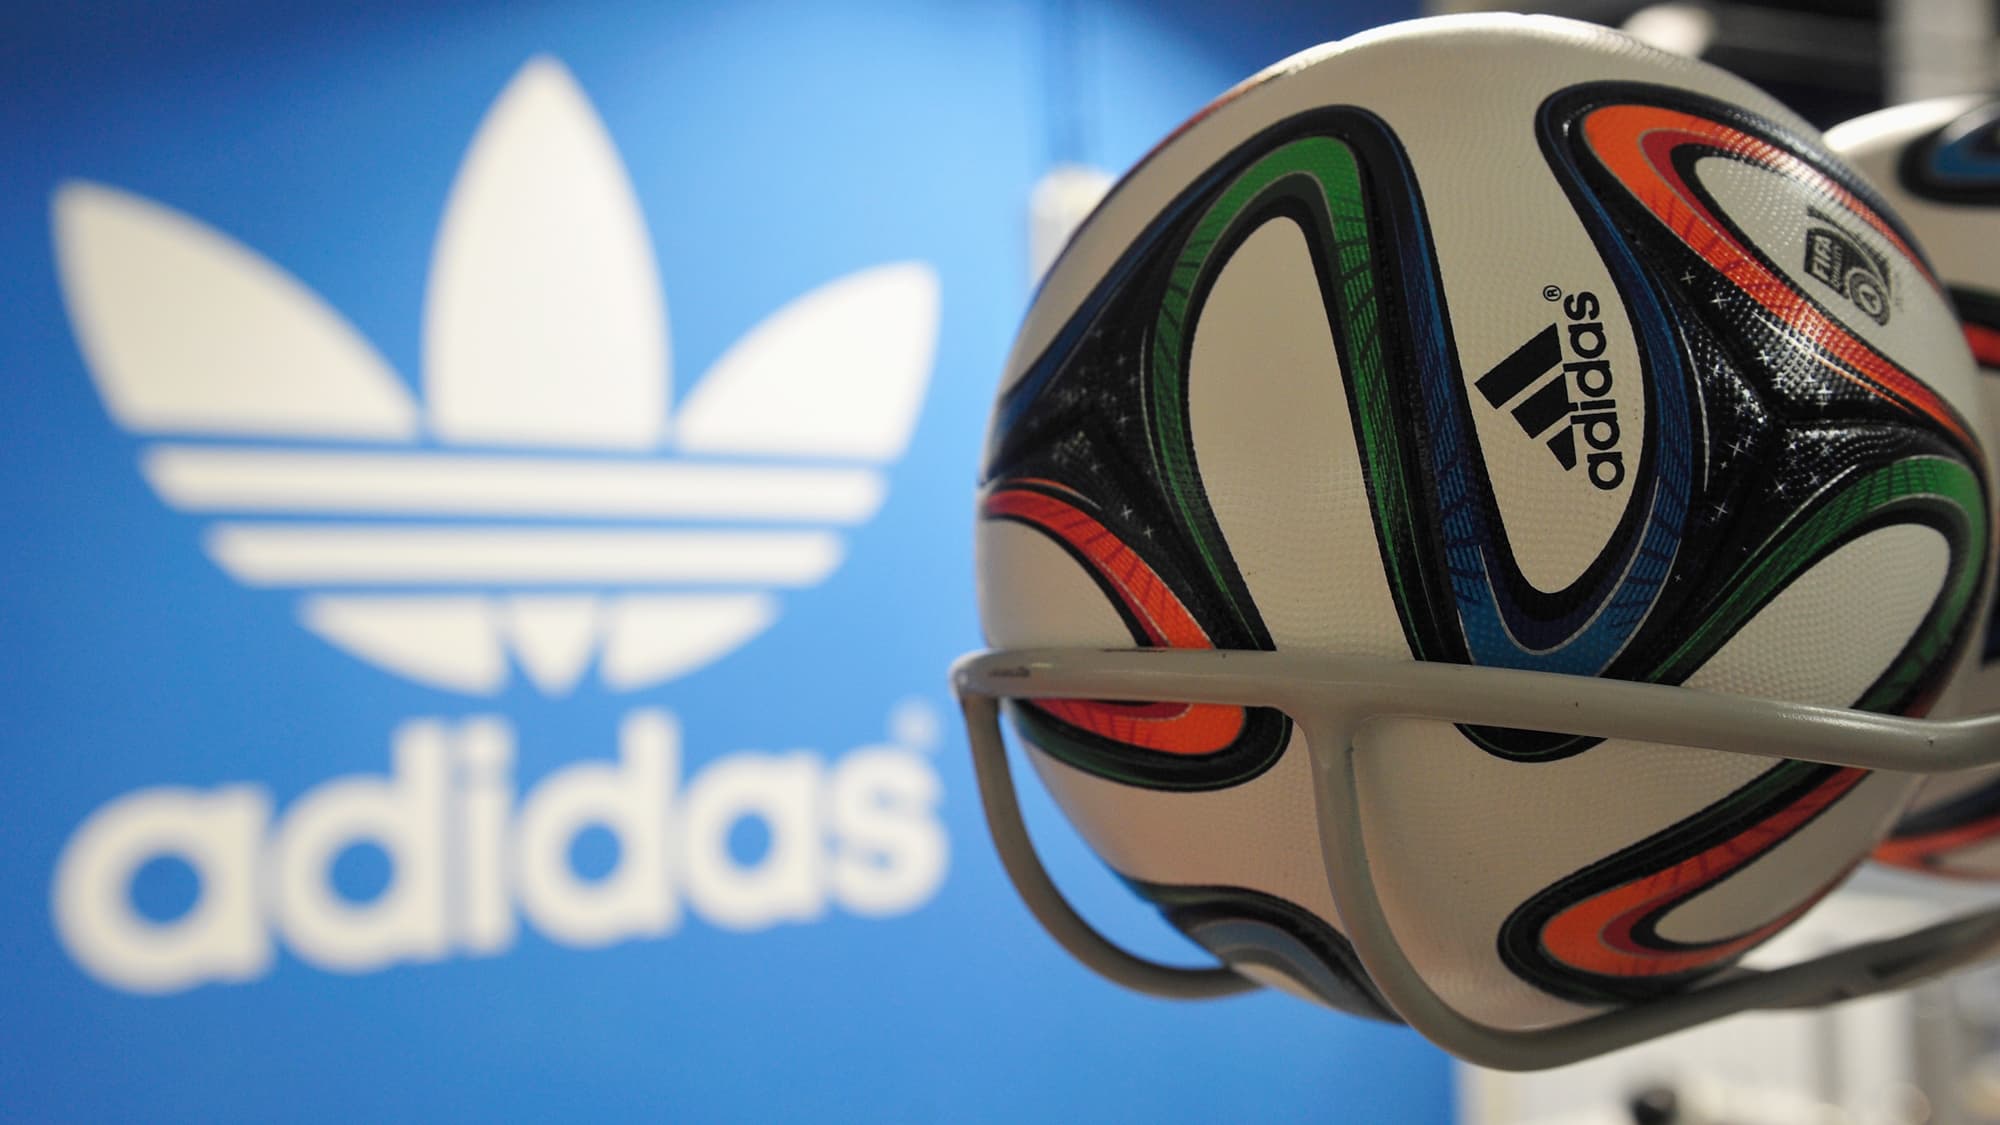 adidas Launches the Brazuca, the World Cup 2014 Official Matchball –  Football Marketing XI